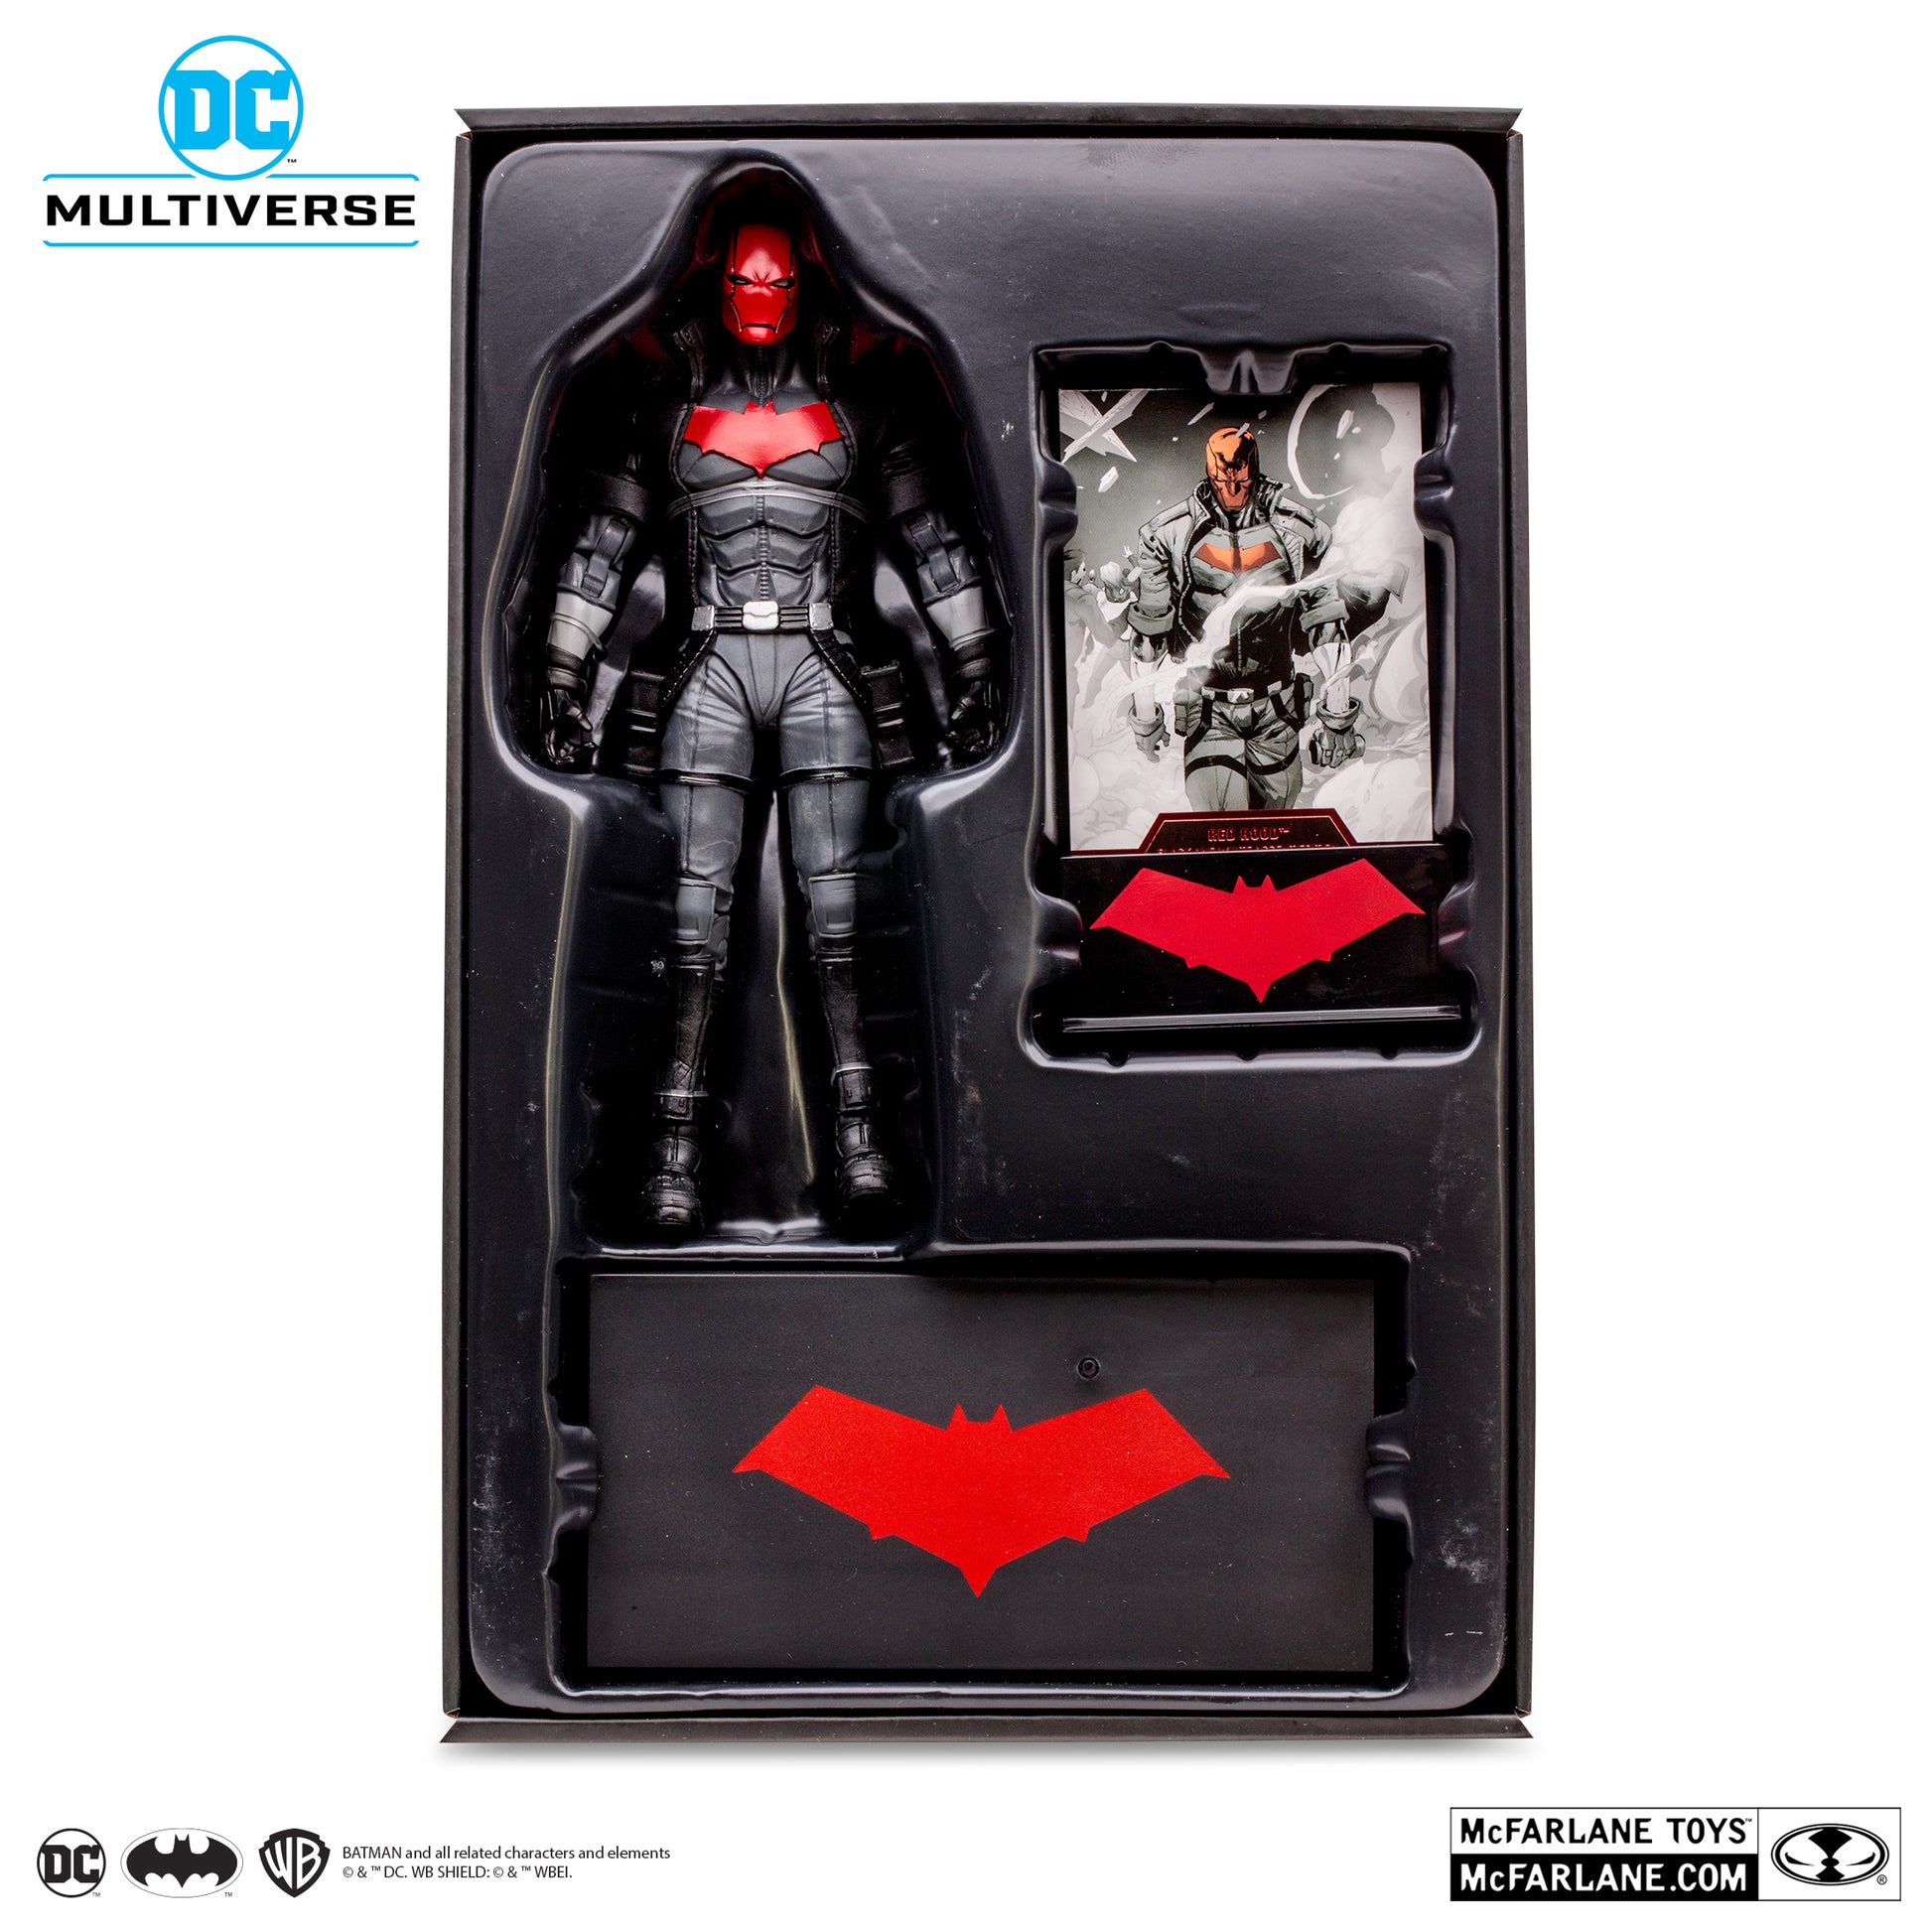 The New 52 DC Multiverse Red Hood BBTS Exclusive Limited Black & White Accent Edition Figure